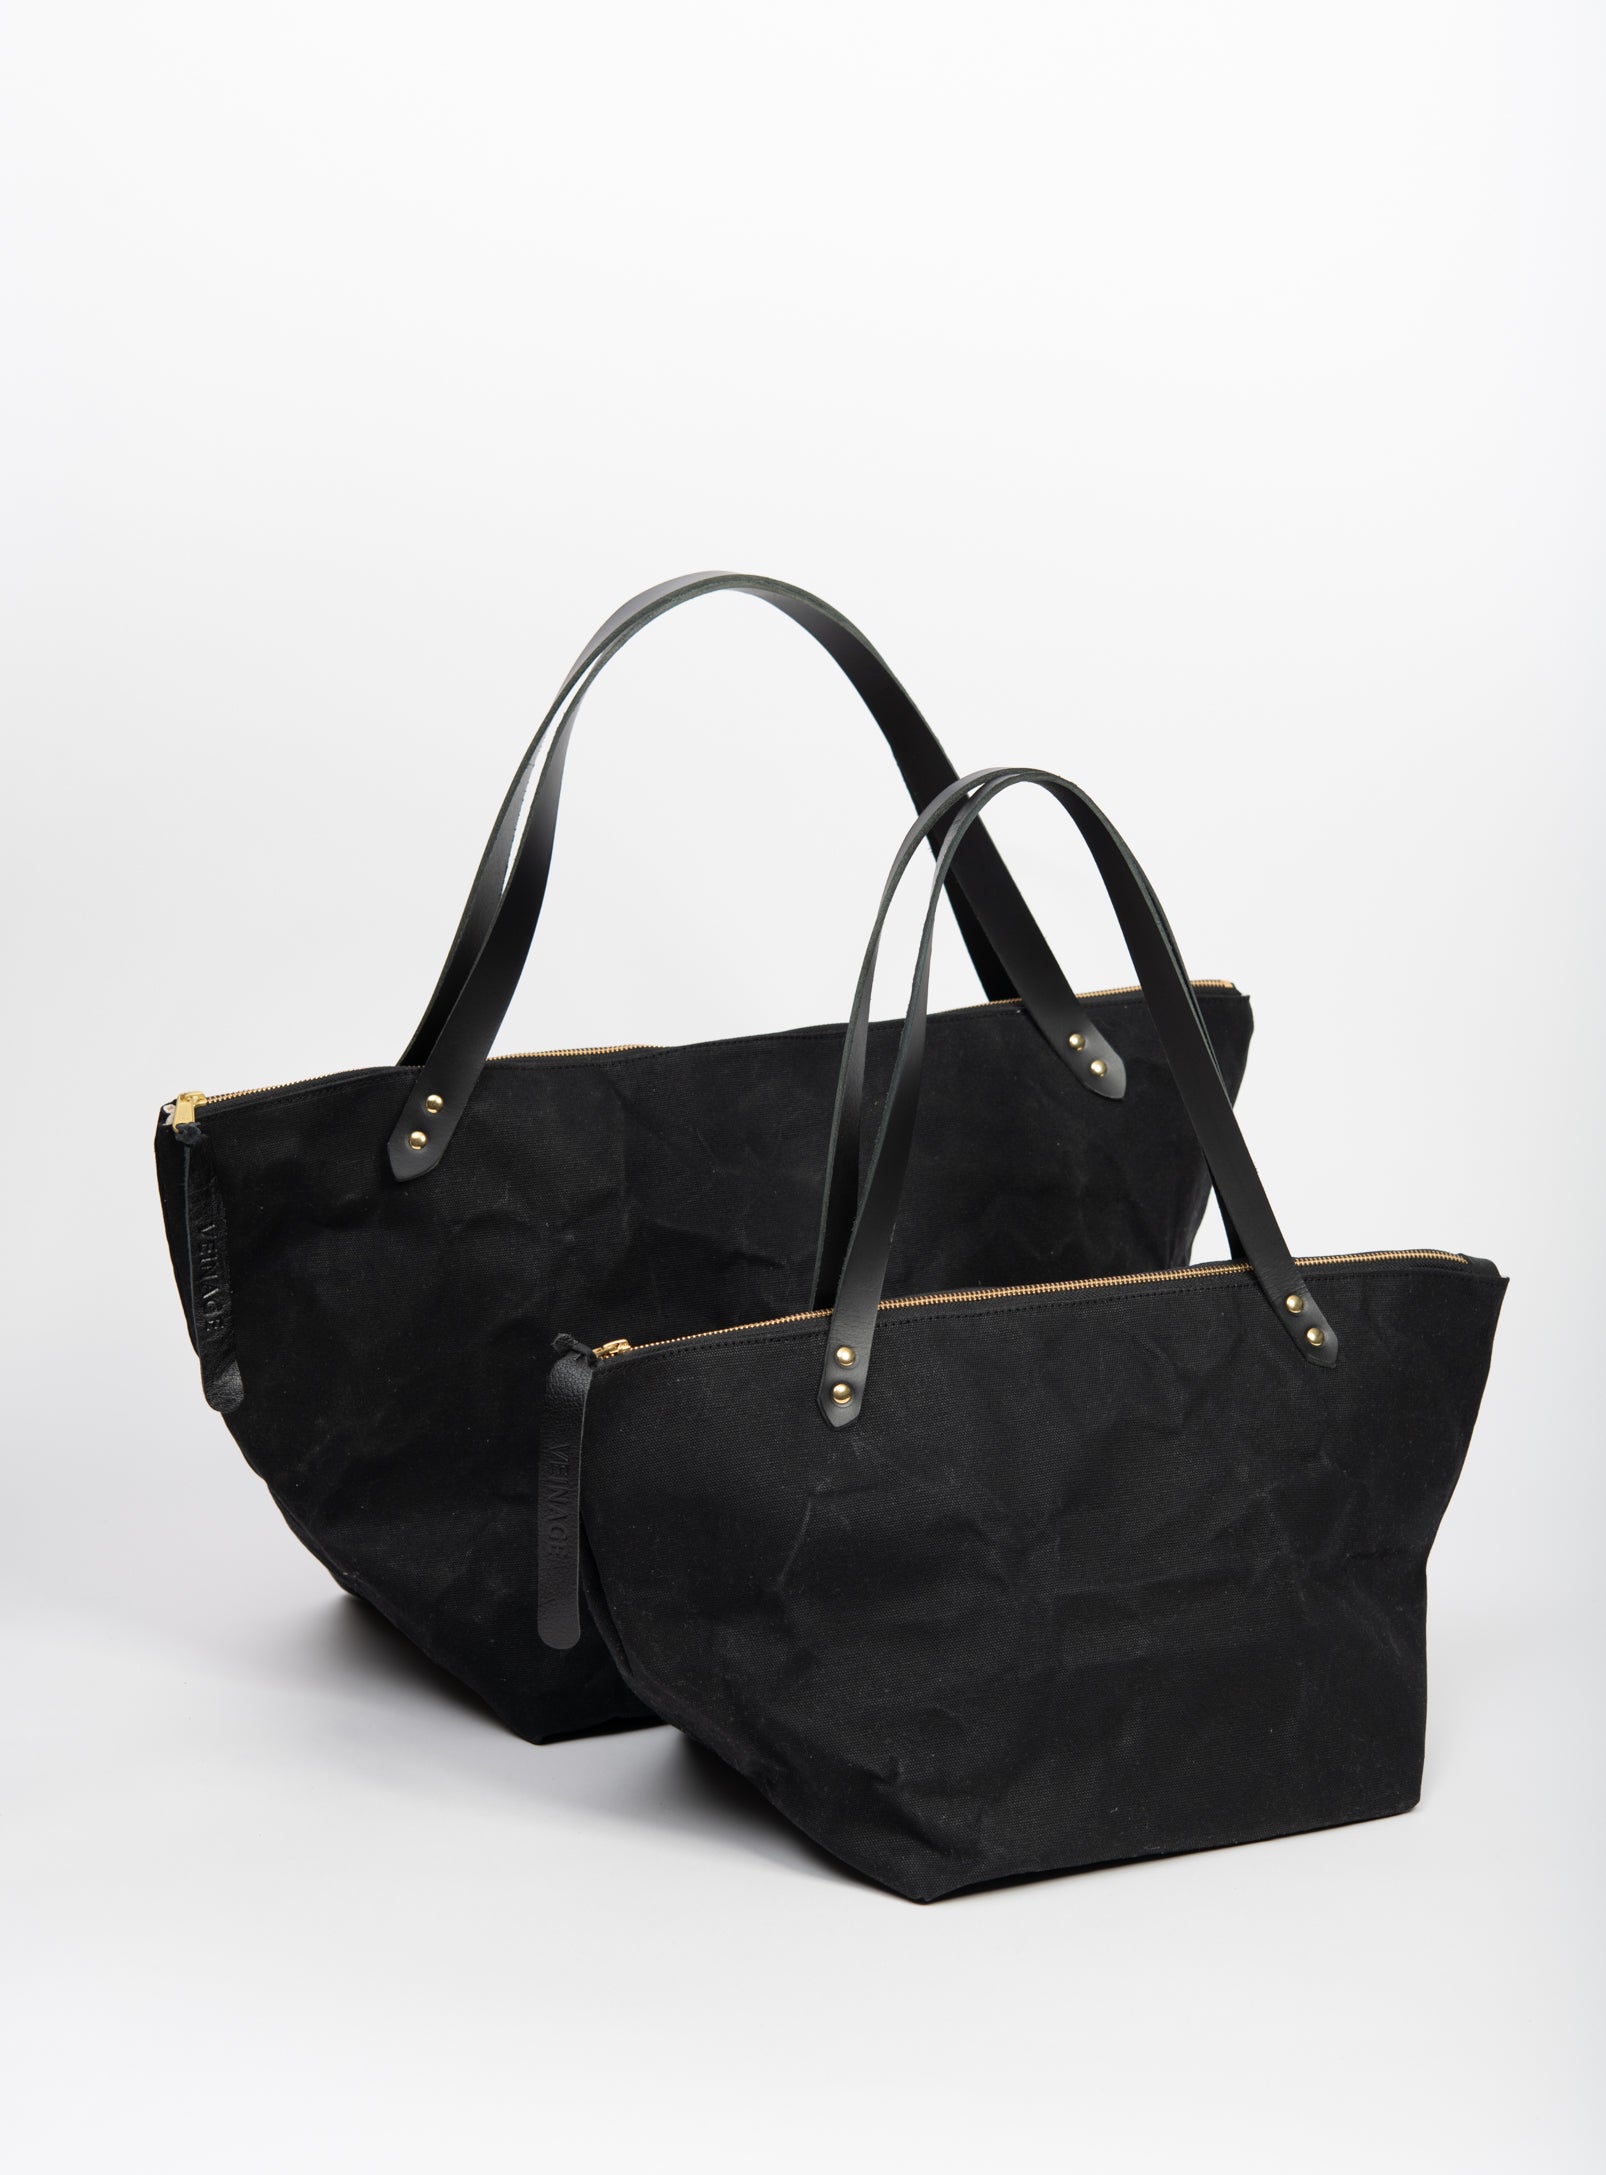 Waxed Canvas Tote Bag, Oversized Tote Bag